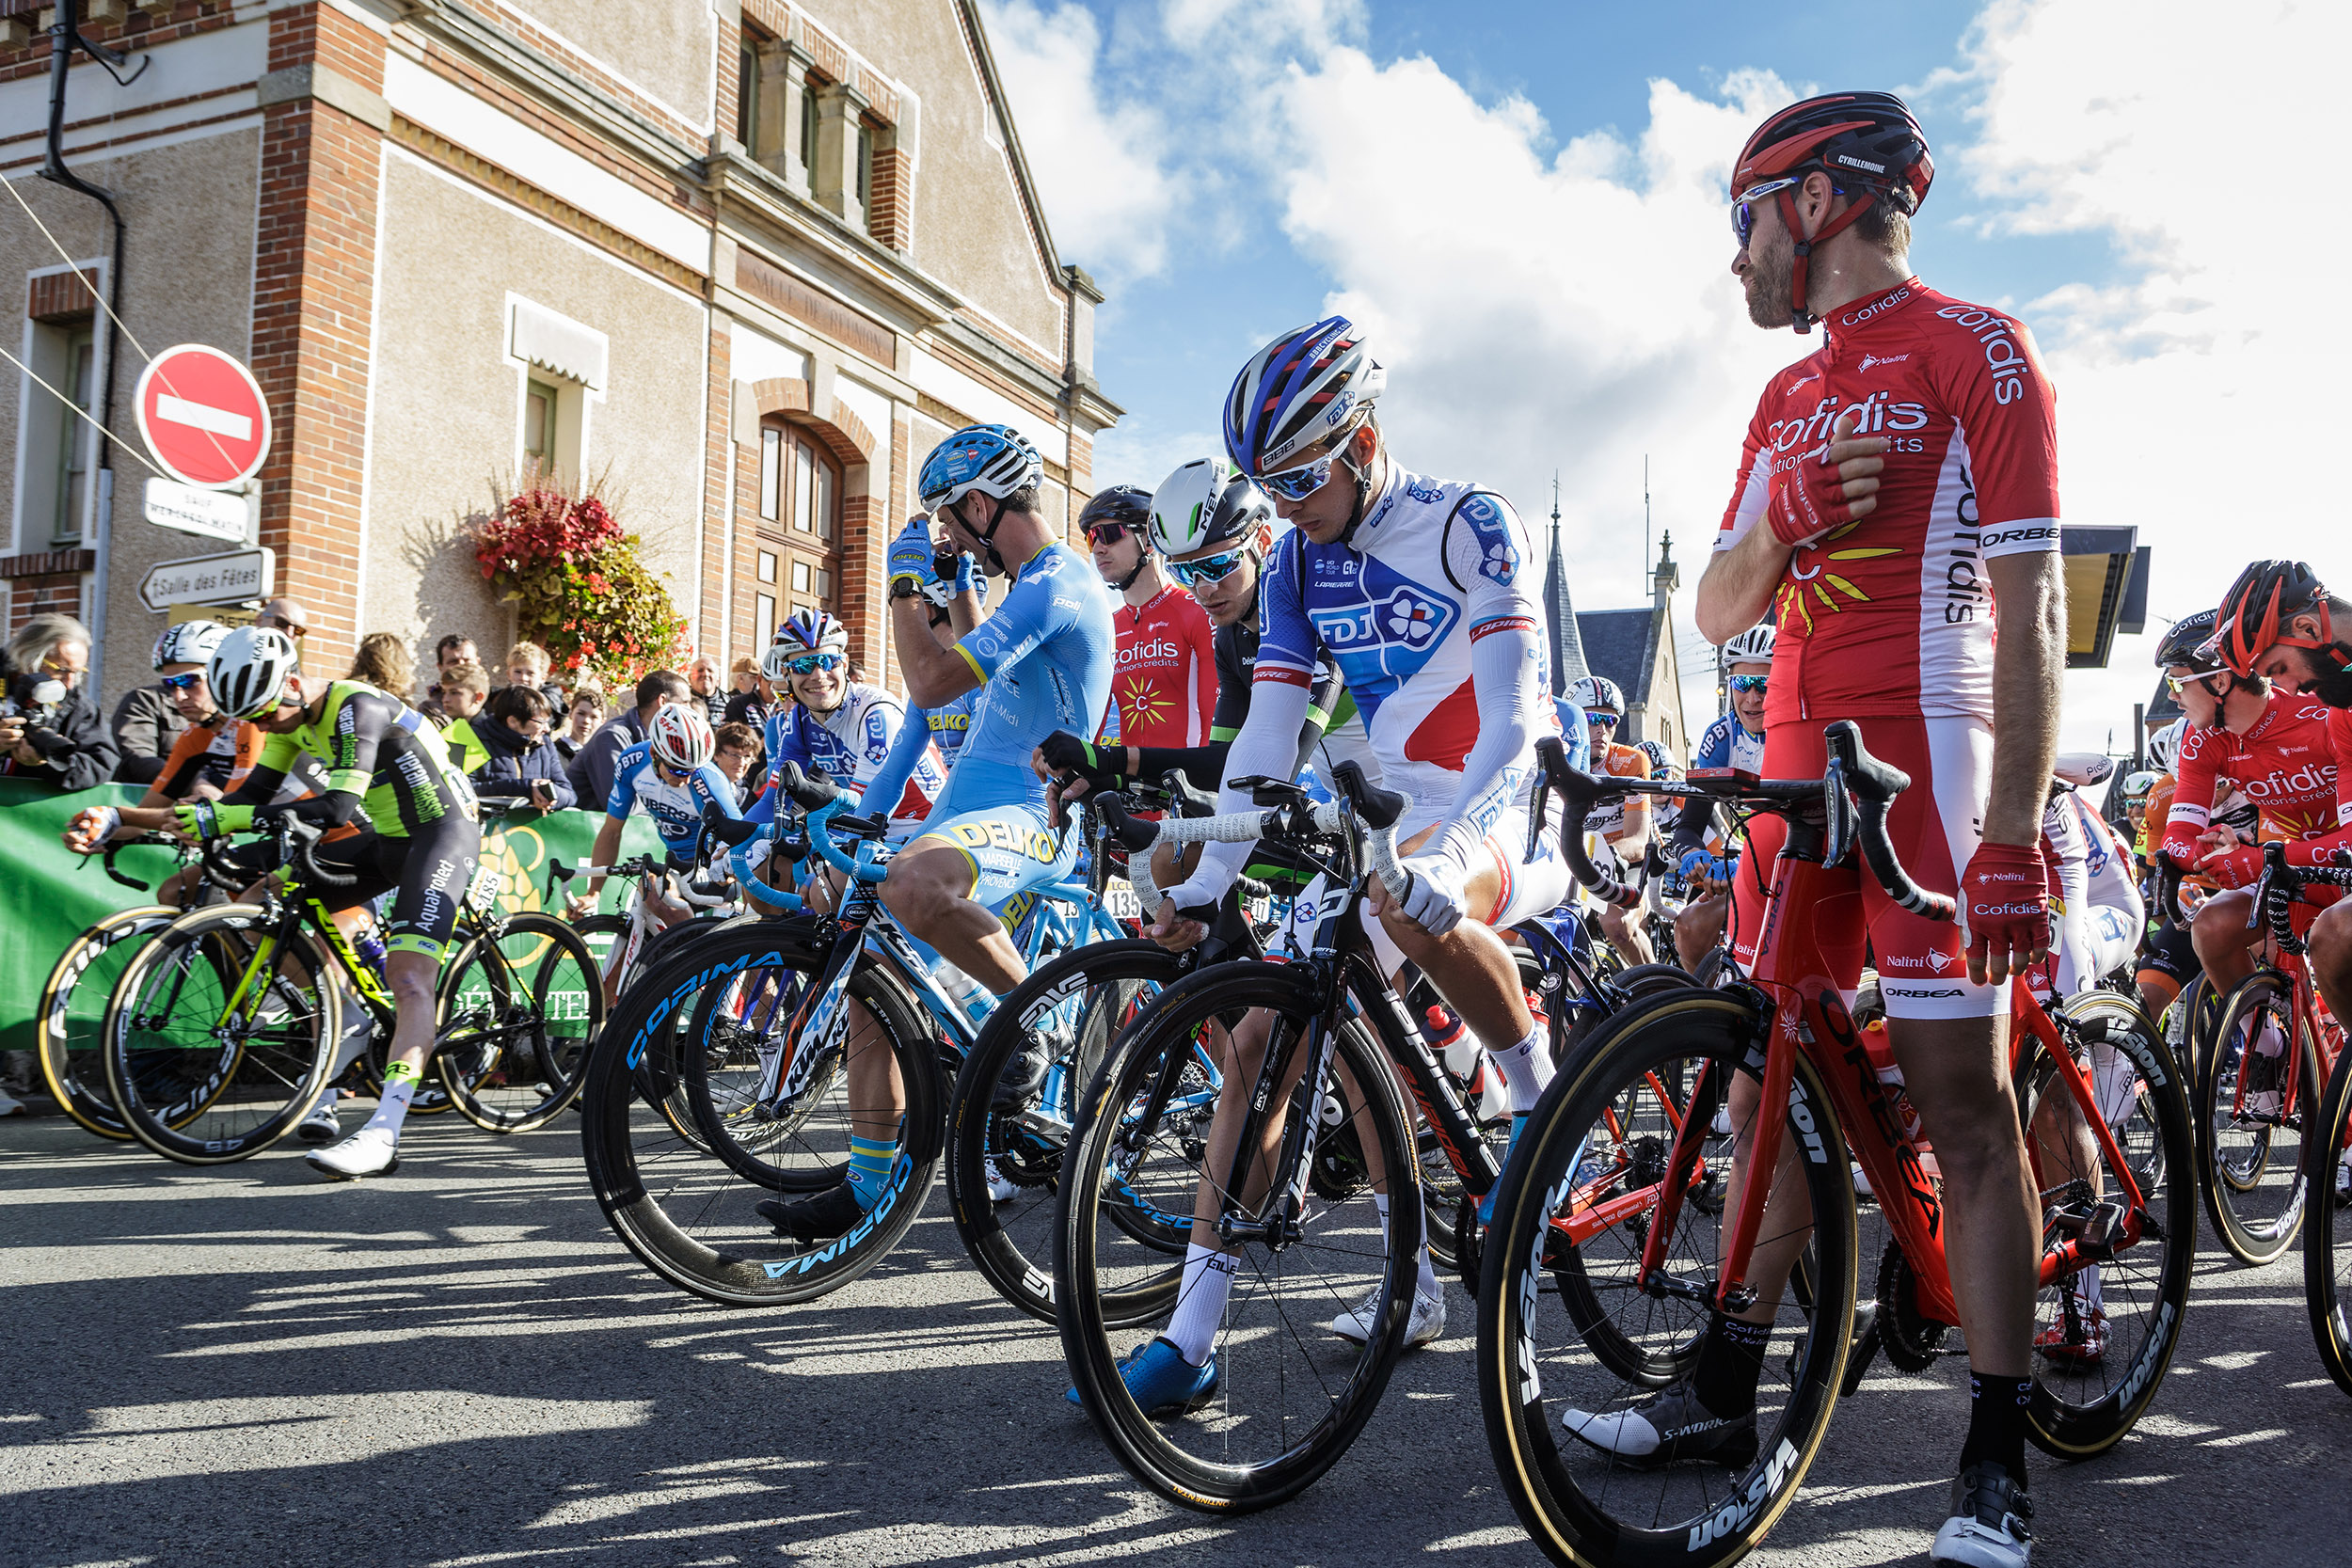 Paris Tours cycle race 2017. Riders on the starting line.